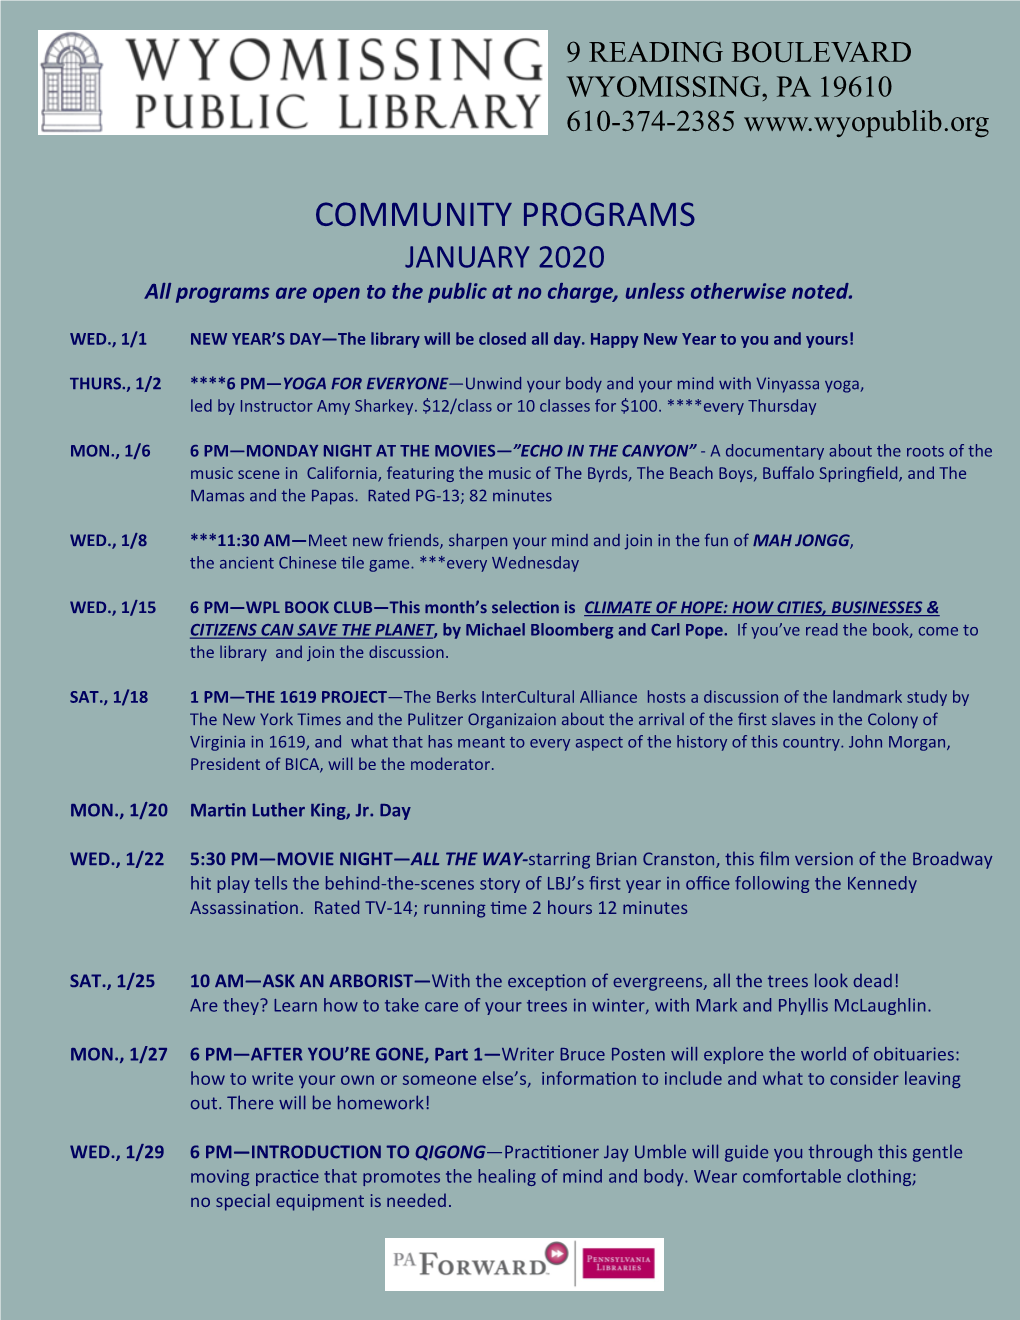 COMMUNITY PROGRAMS JANUARY 2020 All Programs Are Open to the Public at No Charge, Unless Otherwise Noted